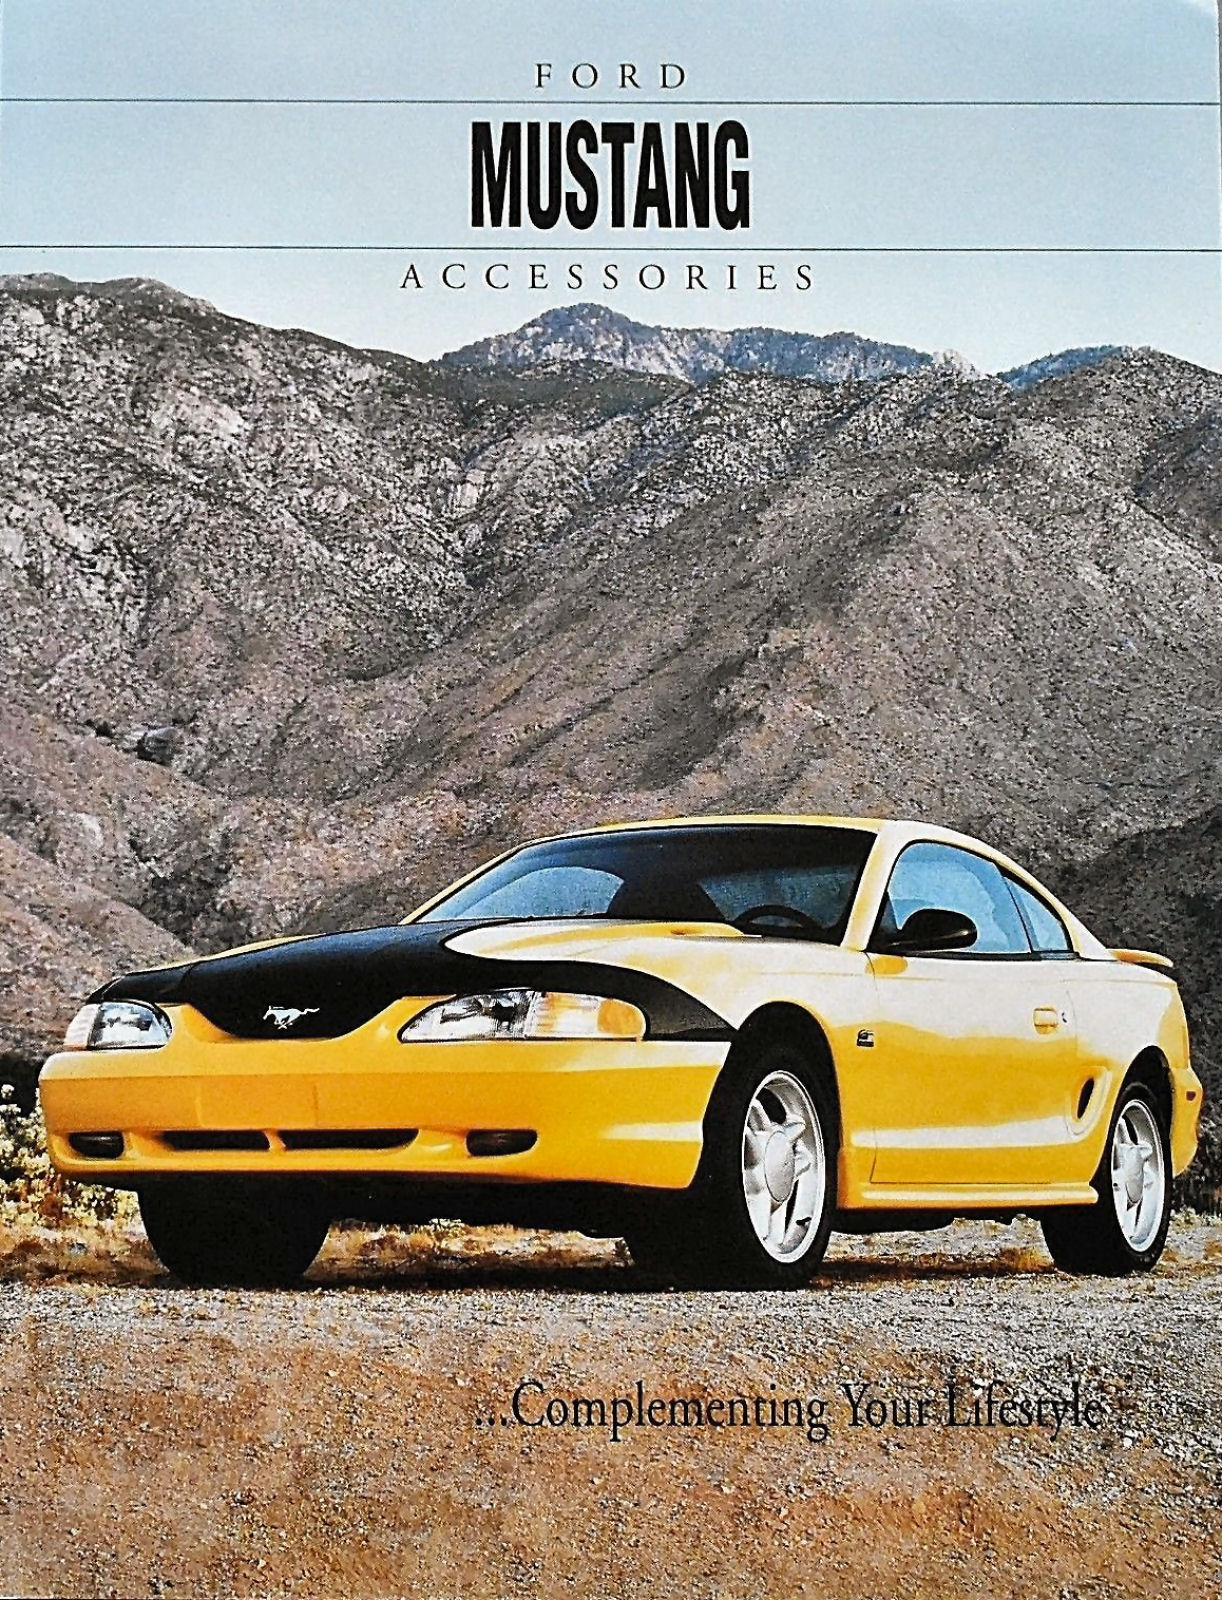 1994_Ford_Mustang_Accessories-01